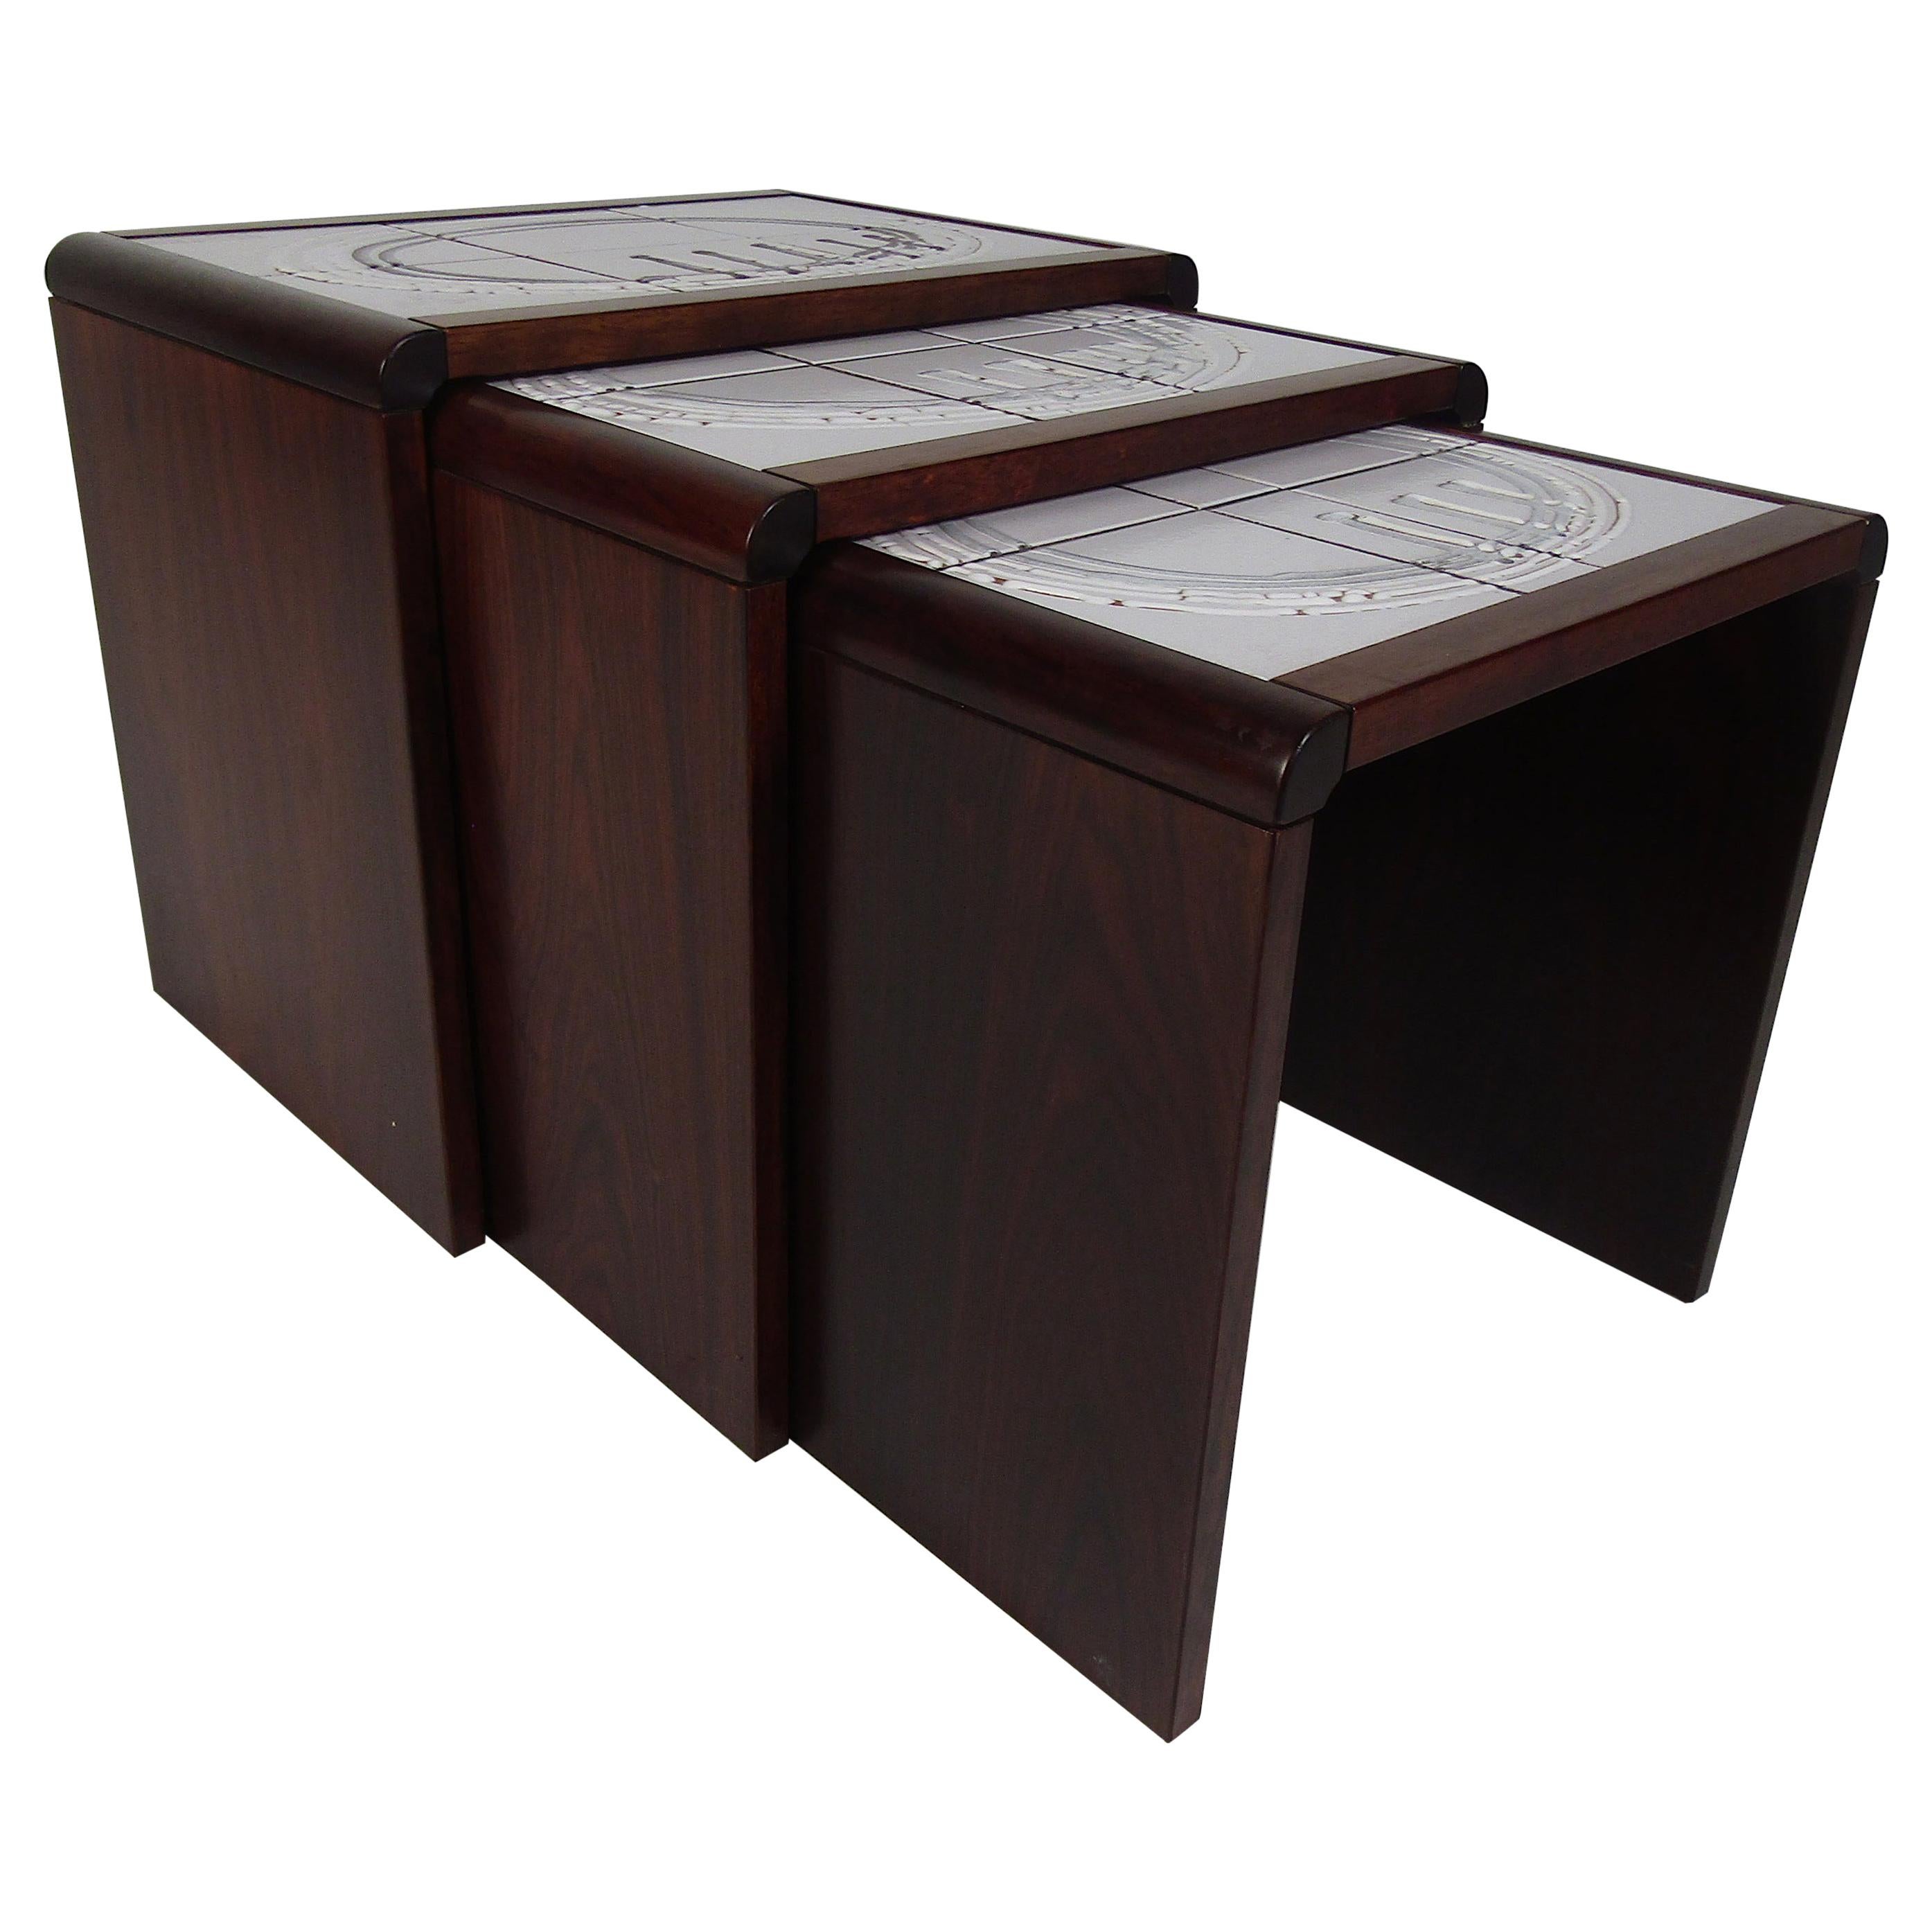 A beautiful set of three tile-top rosewood nesting tables. The unique design on the white tile-top adds to the midcentury appeal. Lovely rosewood wood grain and smooth edges make this the perfect eye-stopping addition to any modern interior. Please